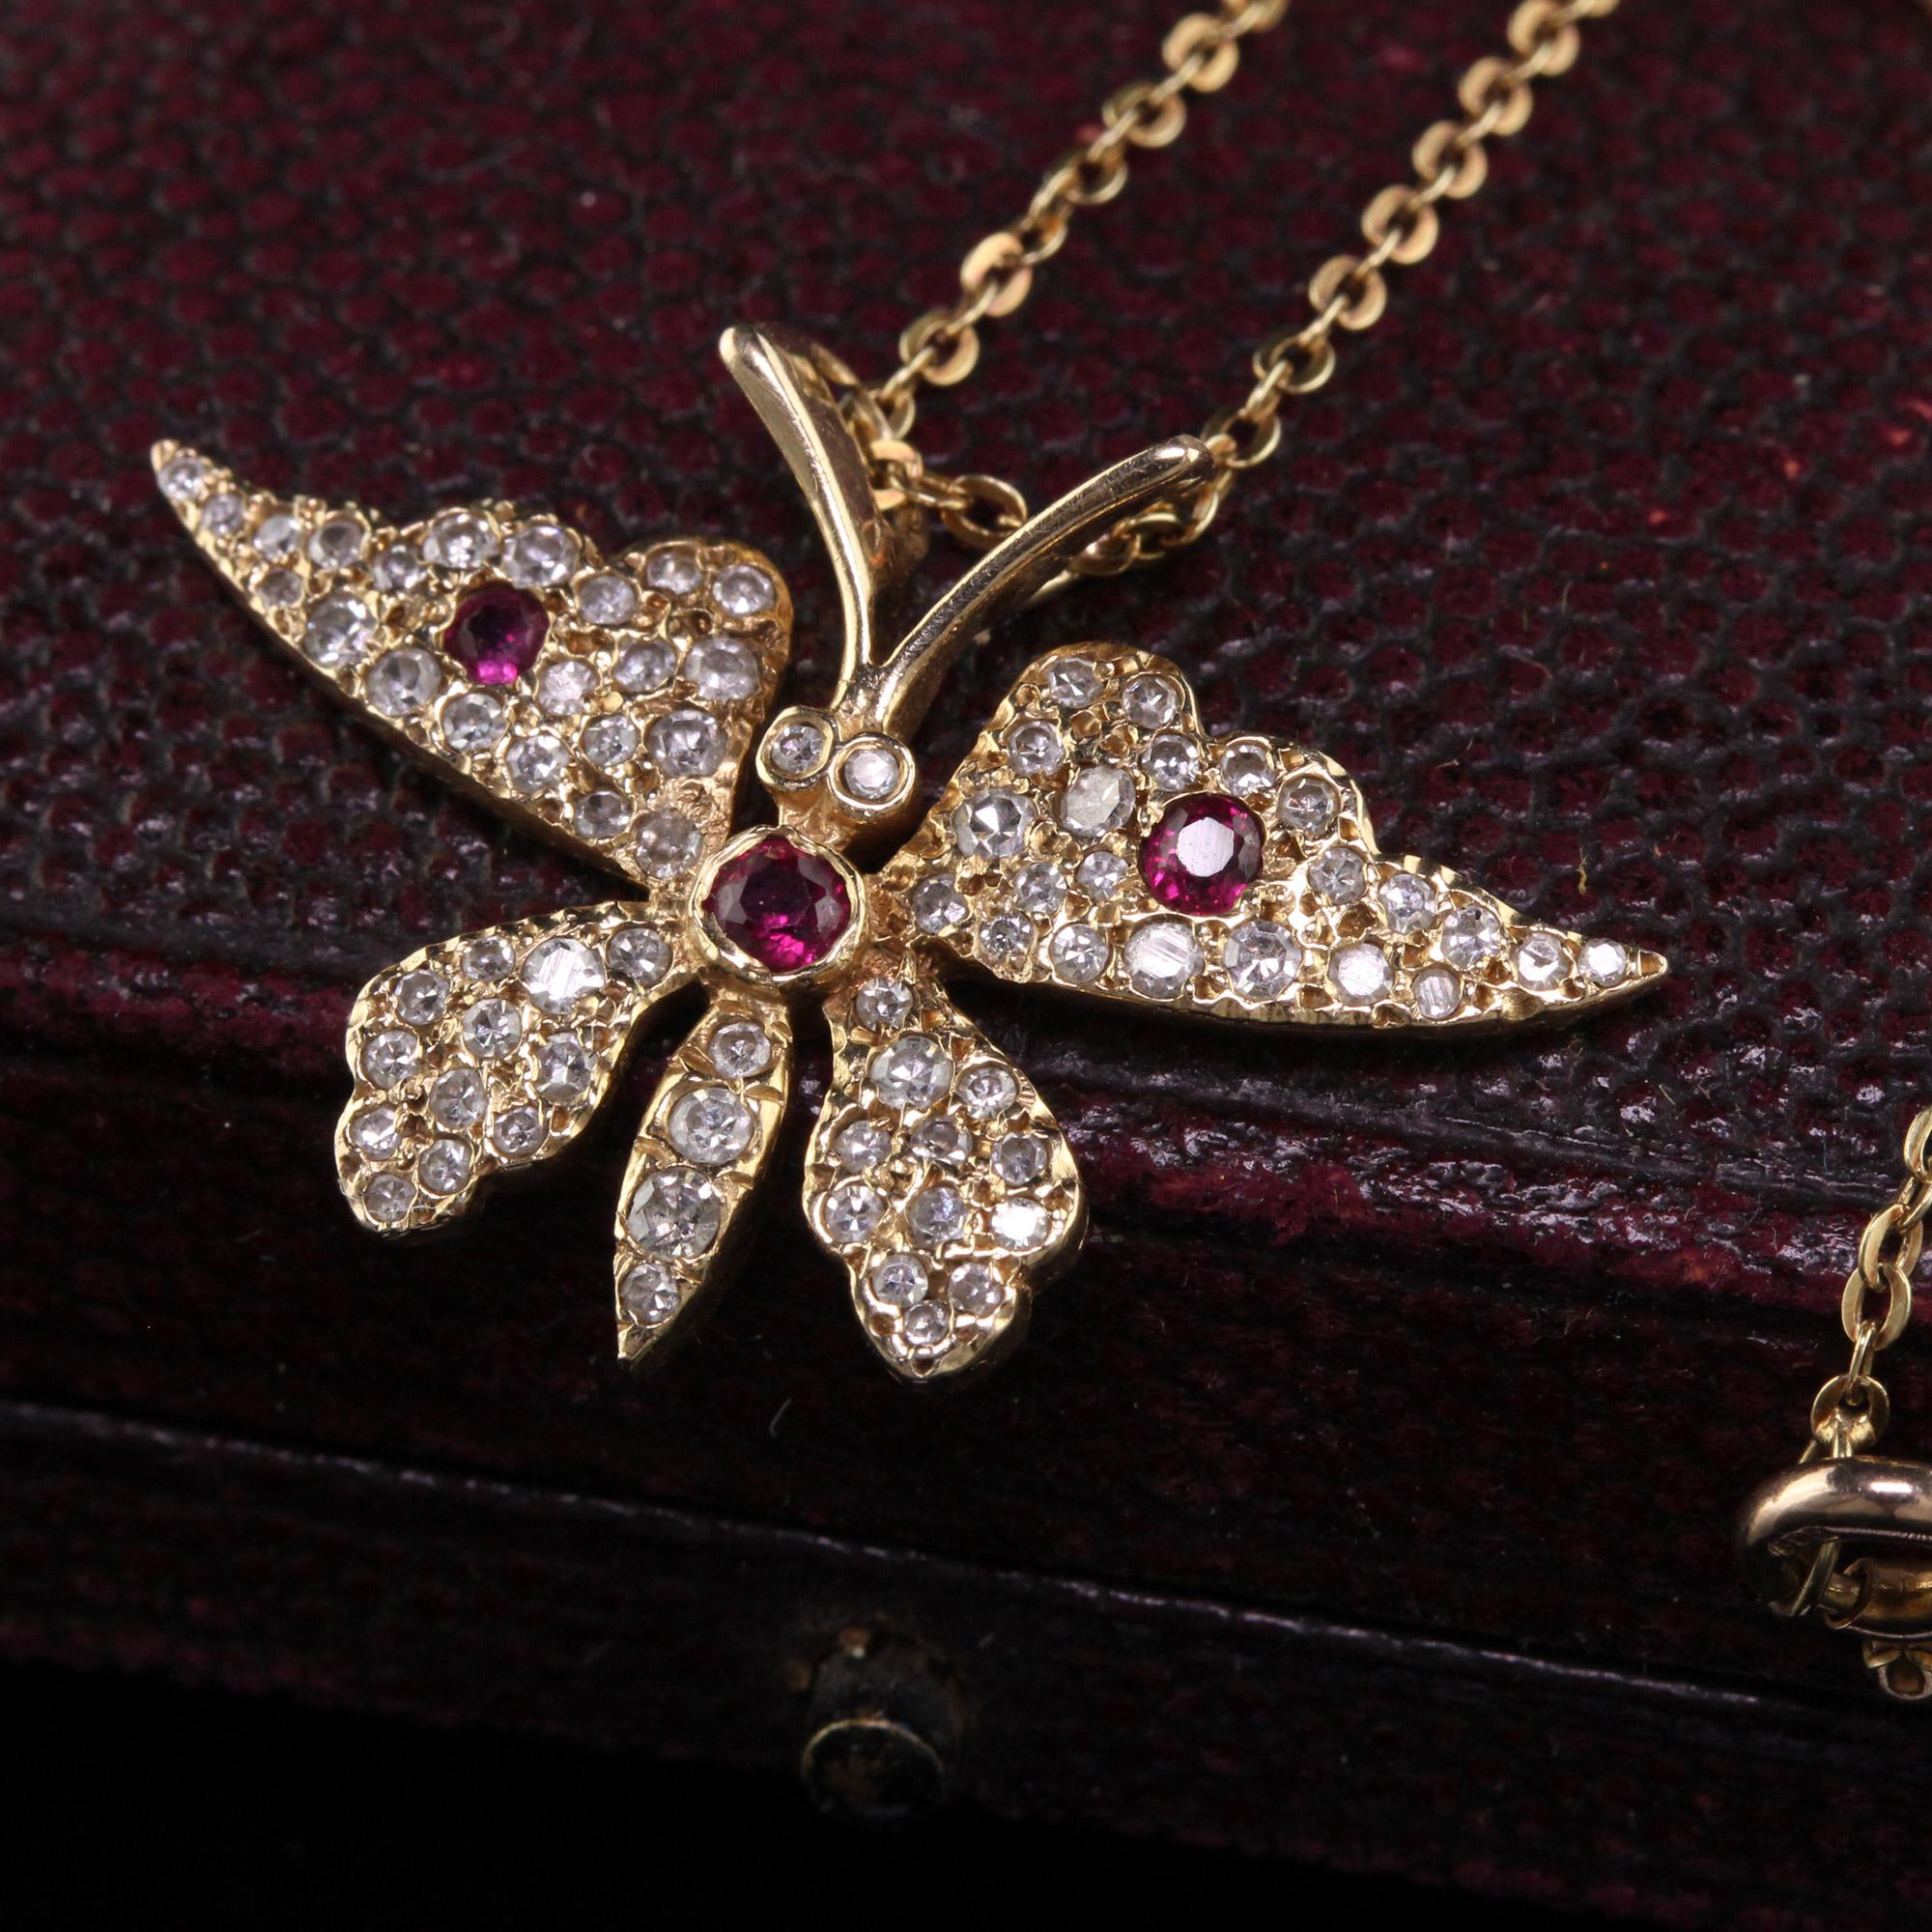 Contemporary Vintage Estate 14K Yellow Gold Diamond and Ruby Butterfly Pendant Necklace